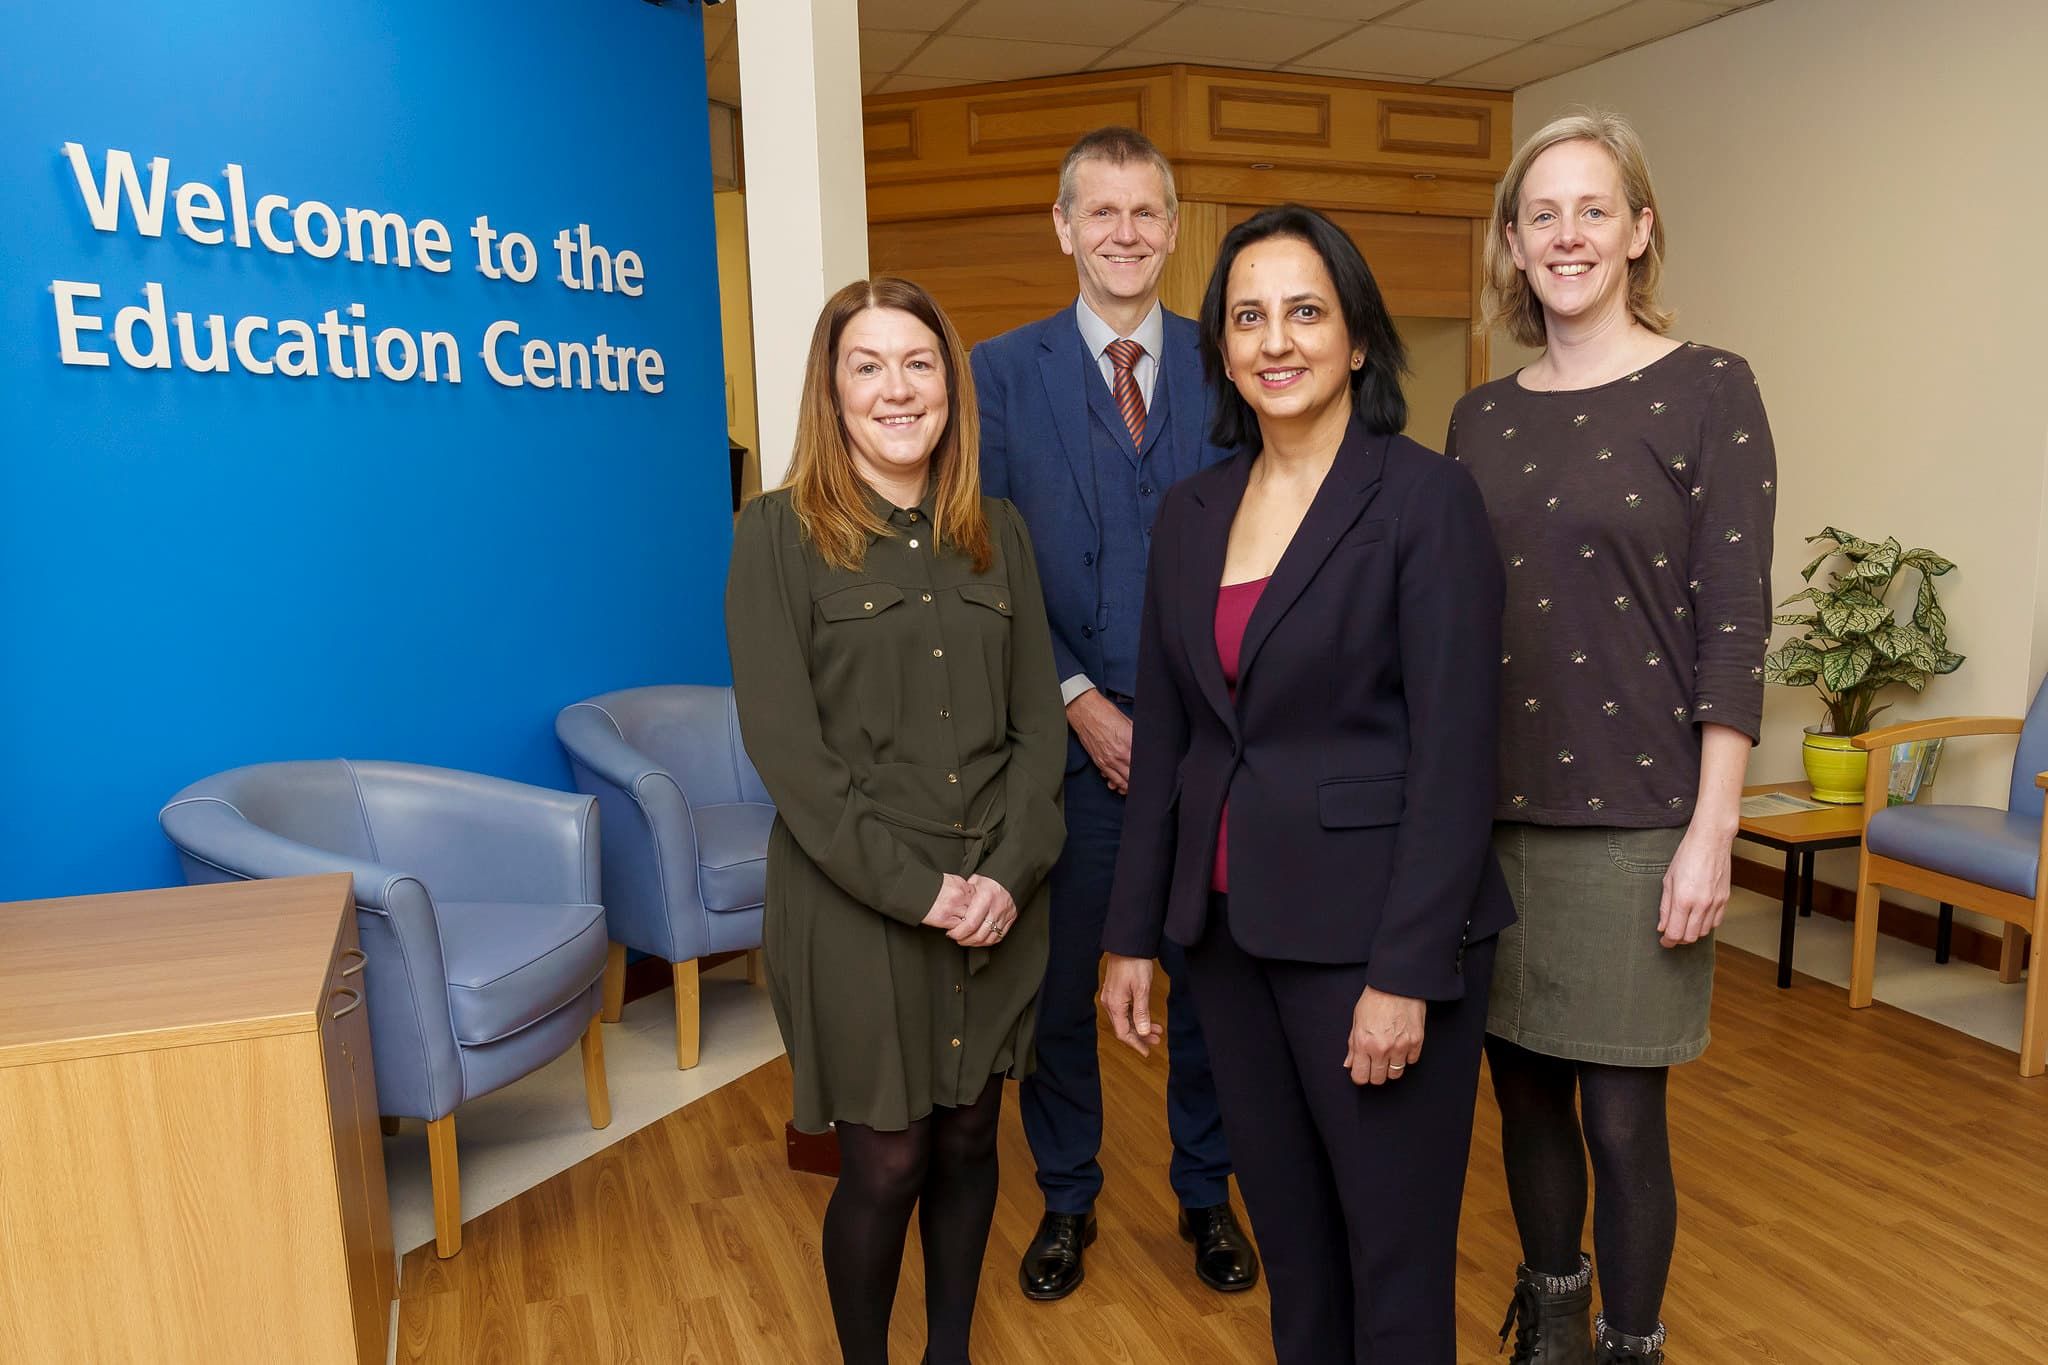 Professor Scott Wilkes, Claire Livingstone, Deepali Varma, and Dr Ellen Tullo at the Education Centre at North Tyneside General Hospital, North Shields, smiling towards the camera